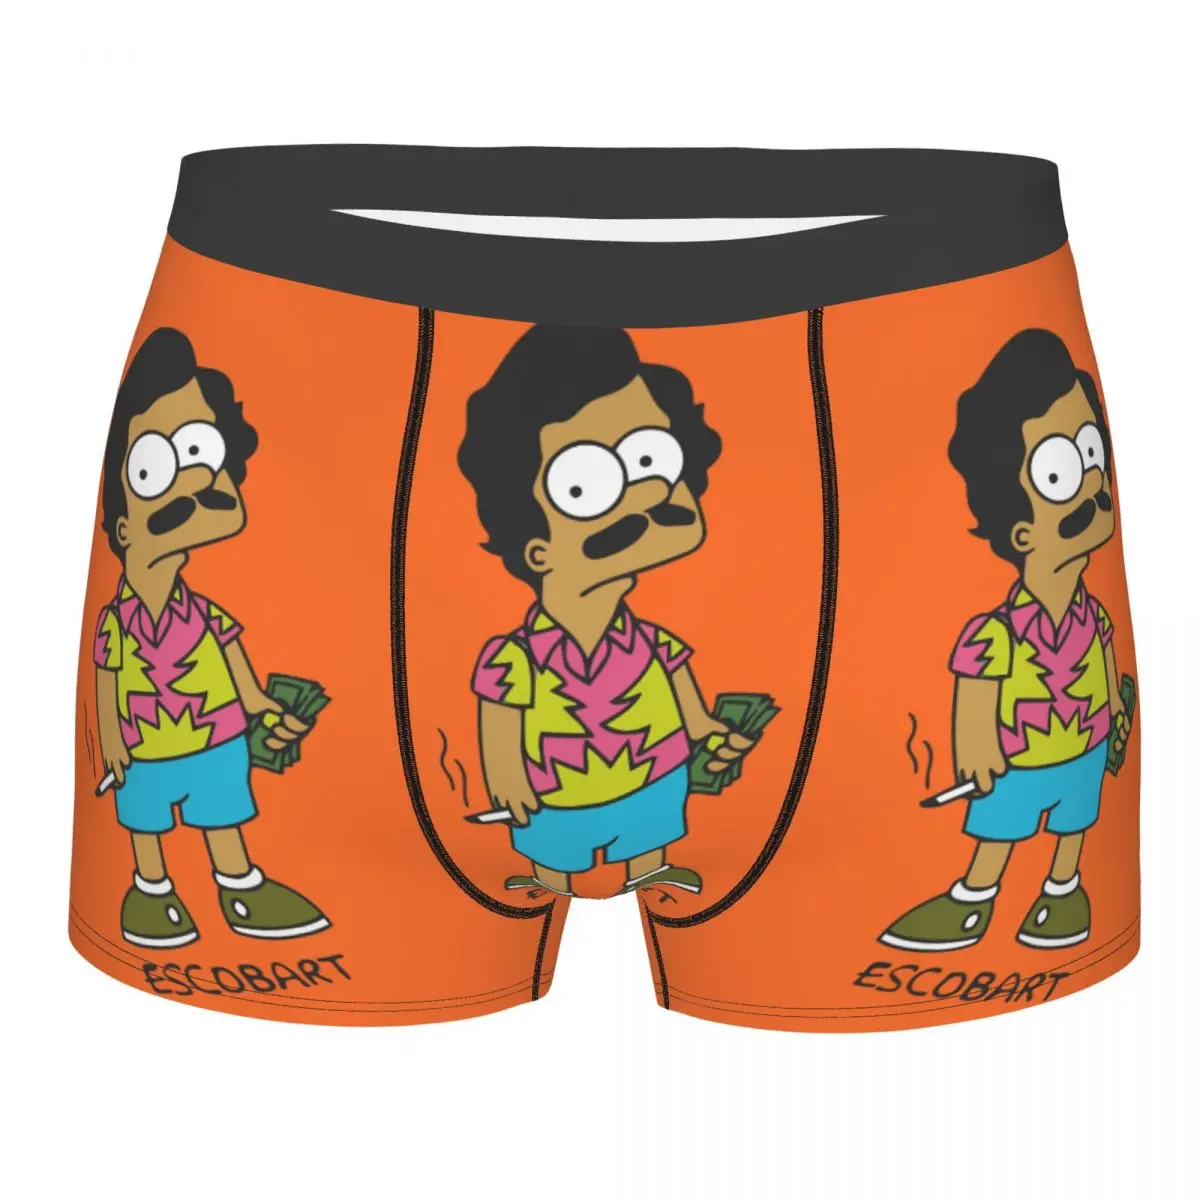 Escobart Man's Printed Boxer Briefs Underpants Highly Breathable Top Quality Birthday Gifts